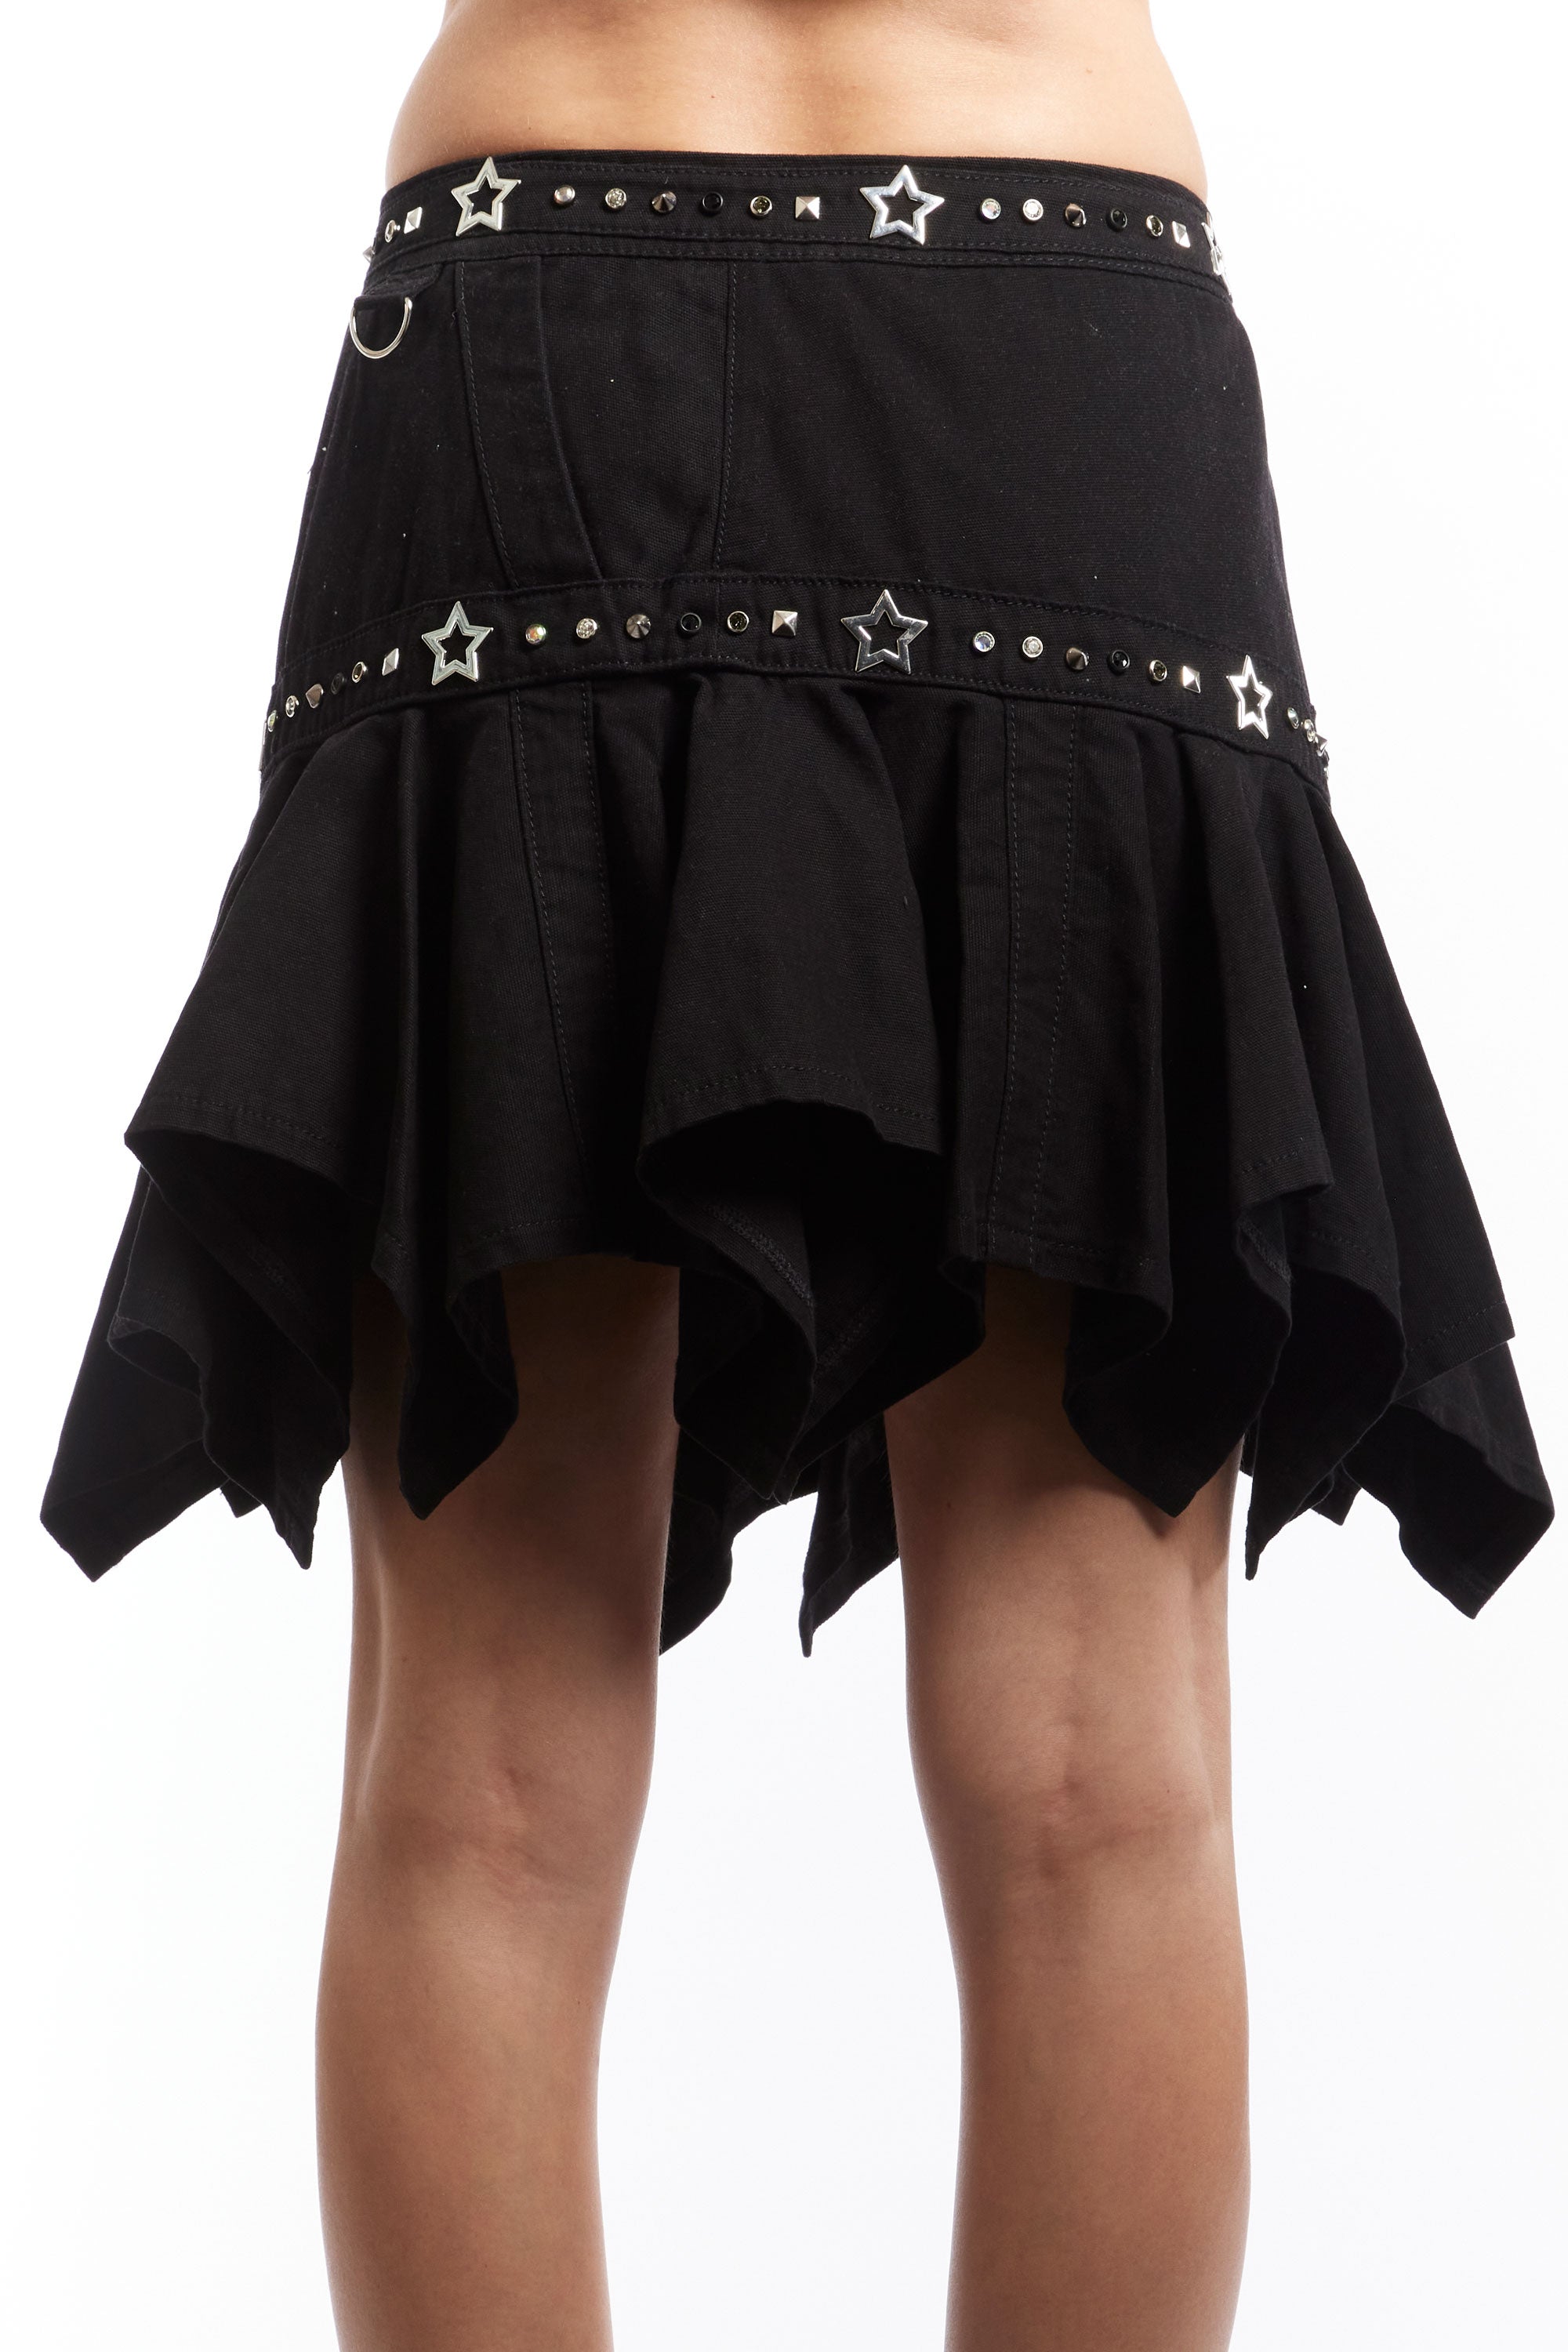 The HEAVEN X KIKO KOSTADINOV STUD SKIRT  available online with global shipping, and in PAM Stores Melbourne and Sydney.